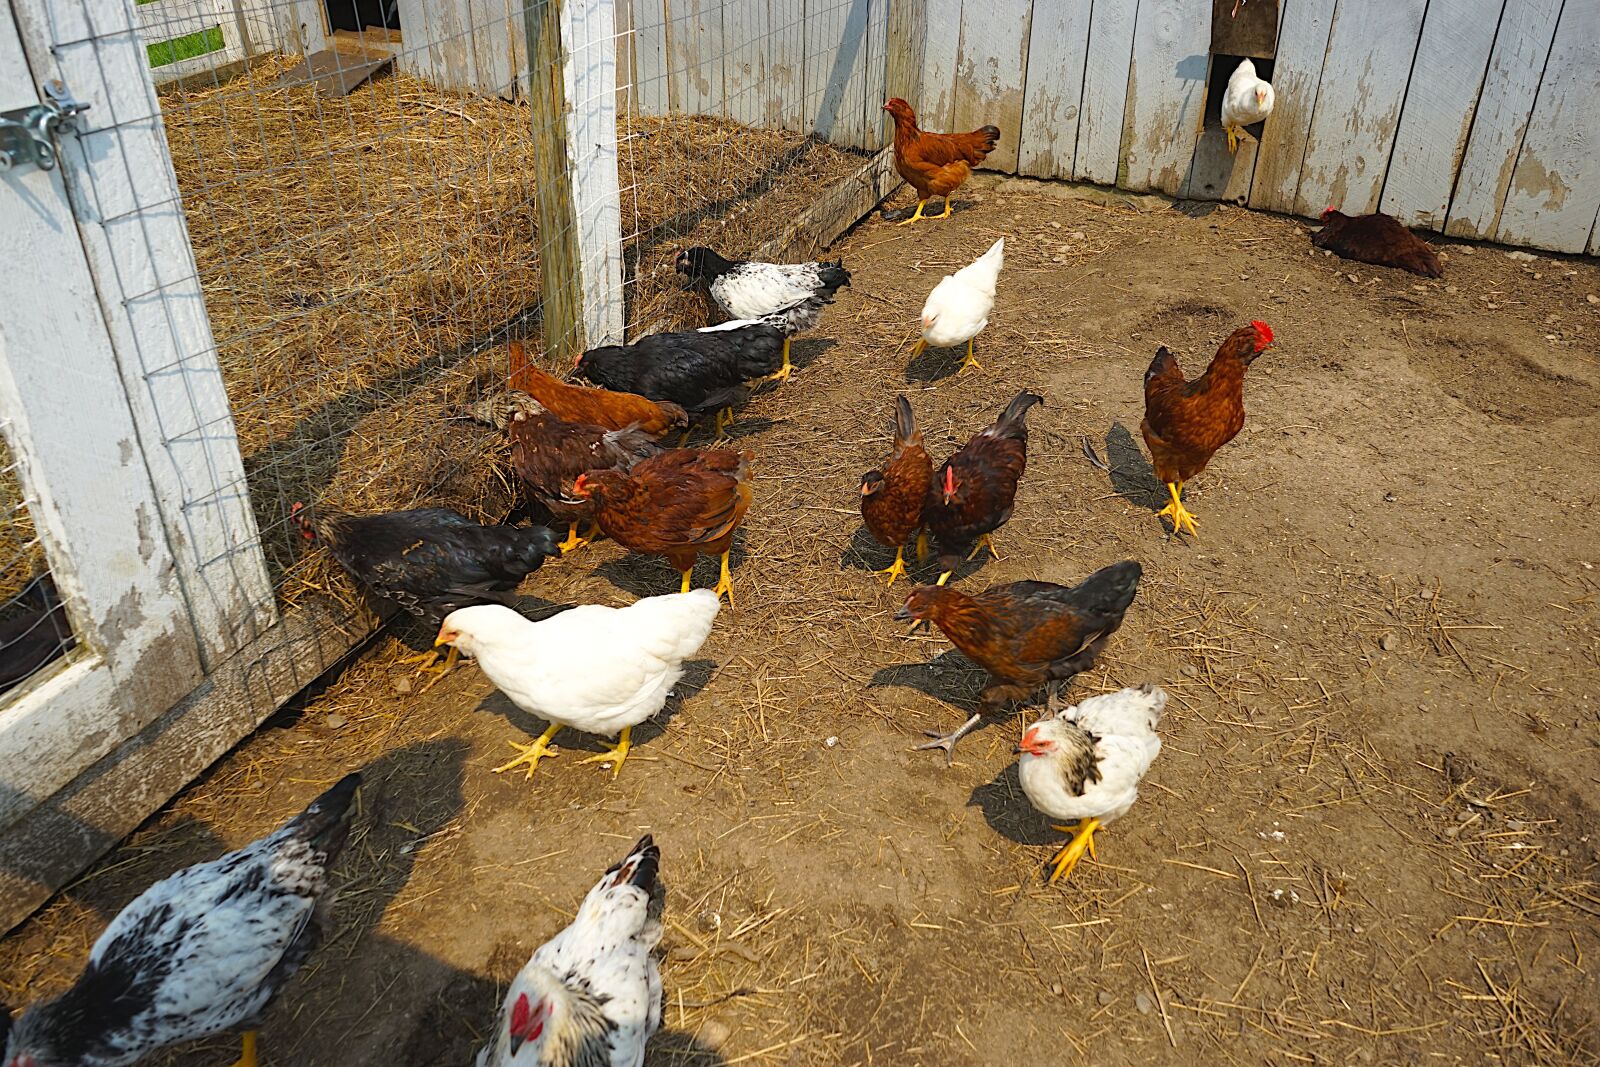 Sony a7 sample photo. Chickens, hens, hens in photography